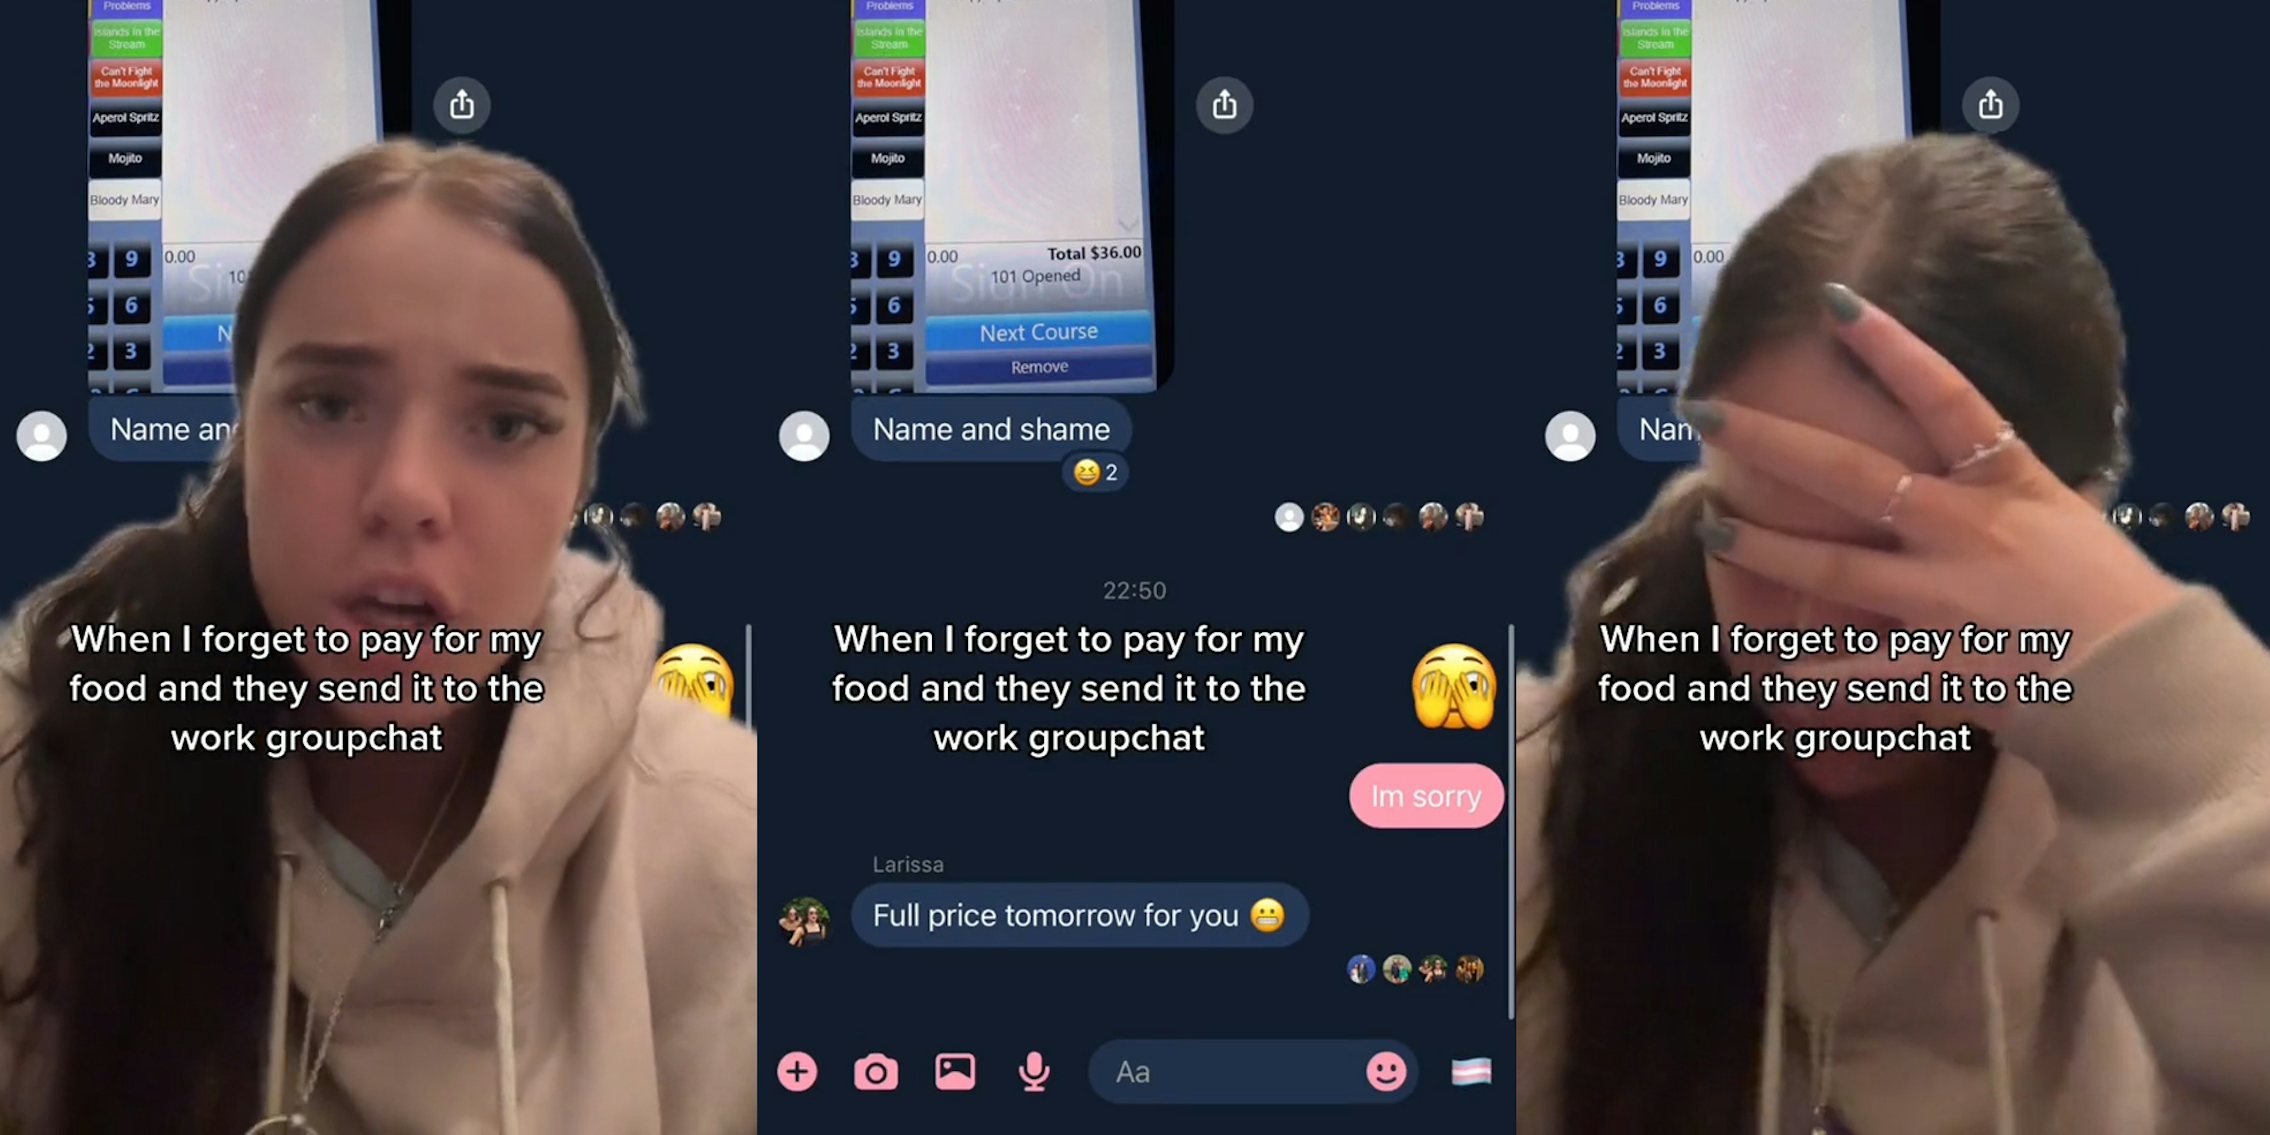 worker greenscreen TikTok over group chat with caption 'When I forgot to pay for my food and they send it to the work groupchat' (l) group chat with caption 'When I forgot to pay for my food and they send it to the work groupchat' (c) worker greenscreen TikTok over group chat with caption 'When I forgot to pay for my food and they send it to the work groupchat' (r)